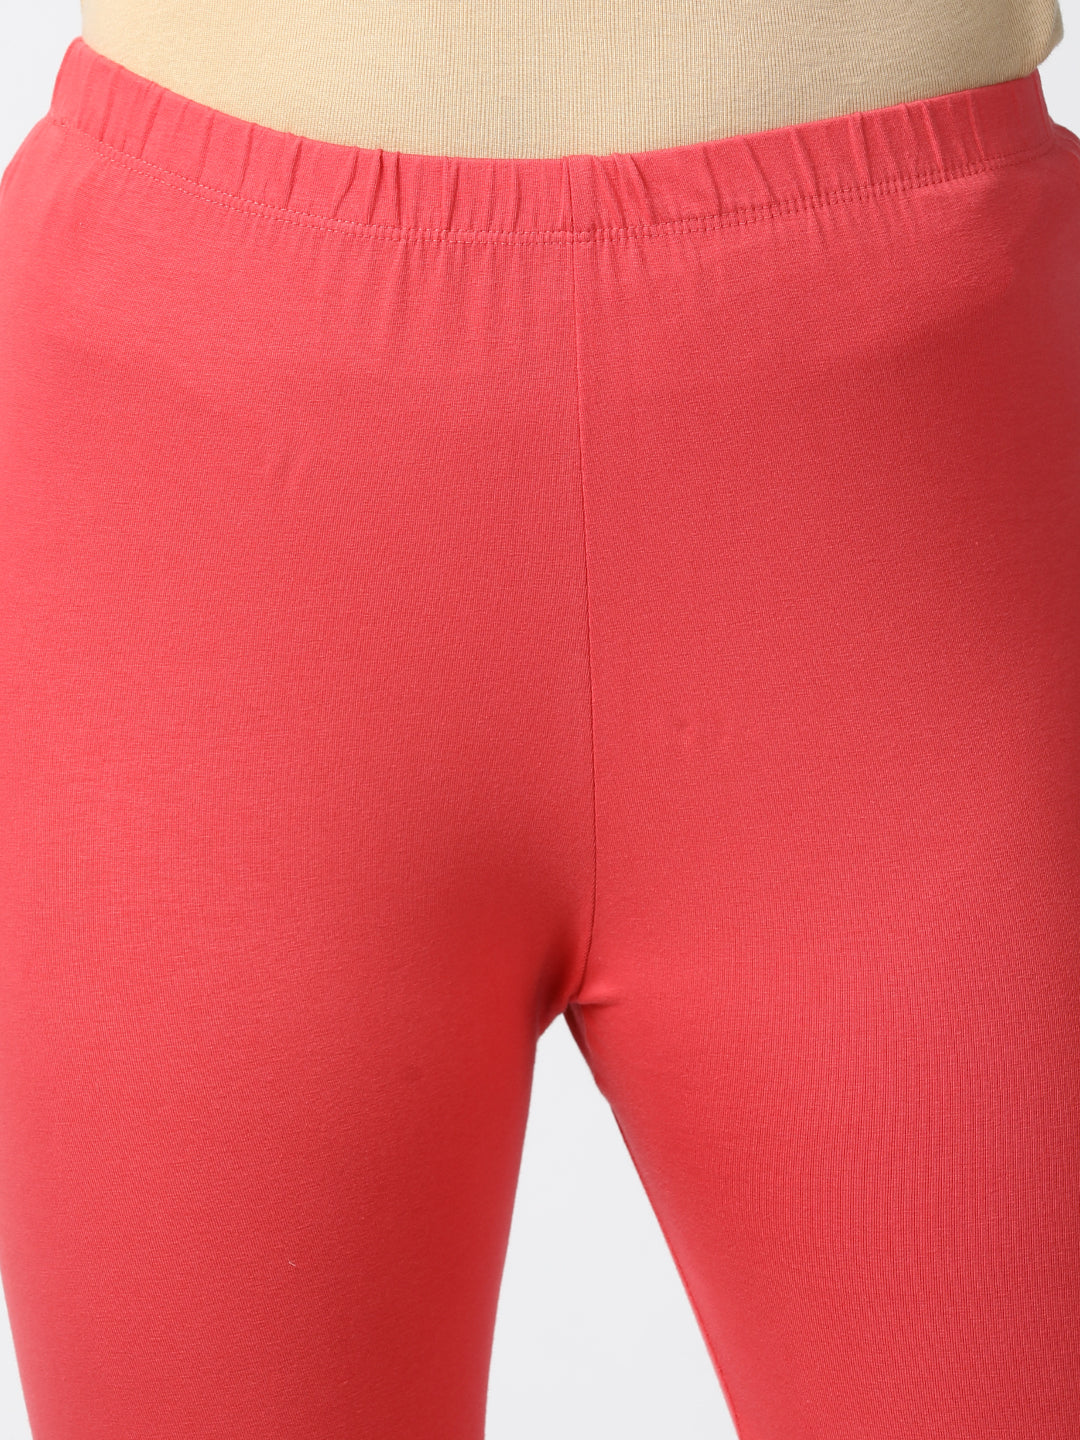 Peach Pink Chic  Women's Comfort In Cotton Ankle-Length Leggings